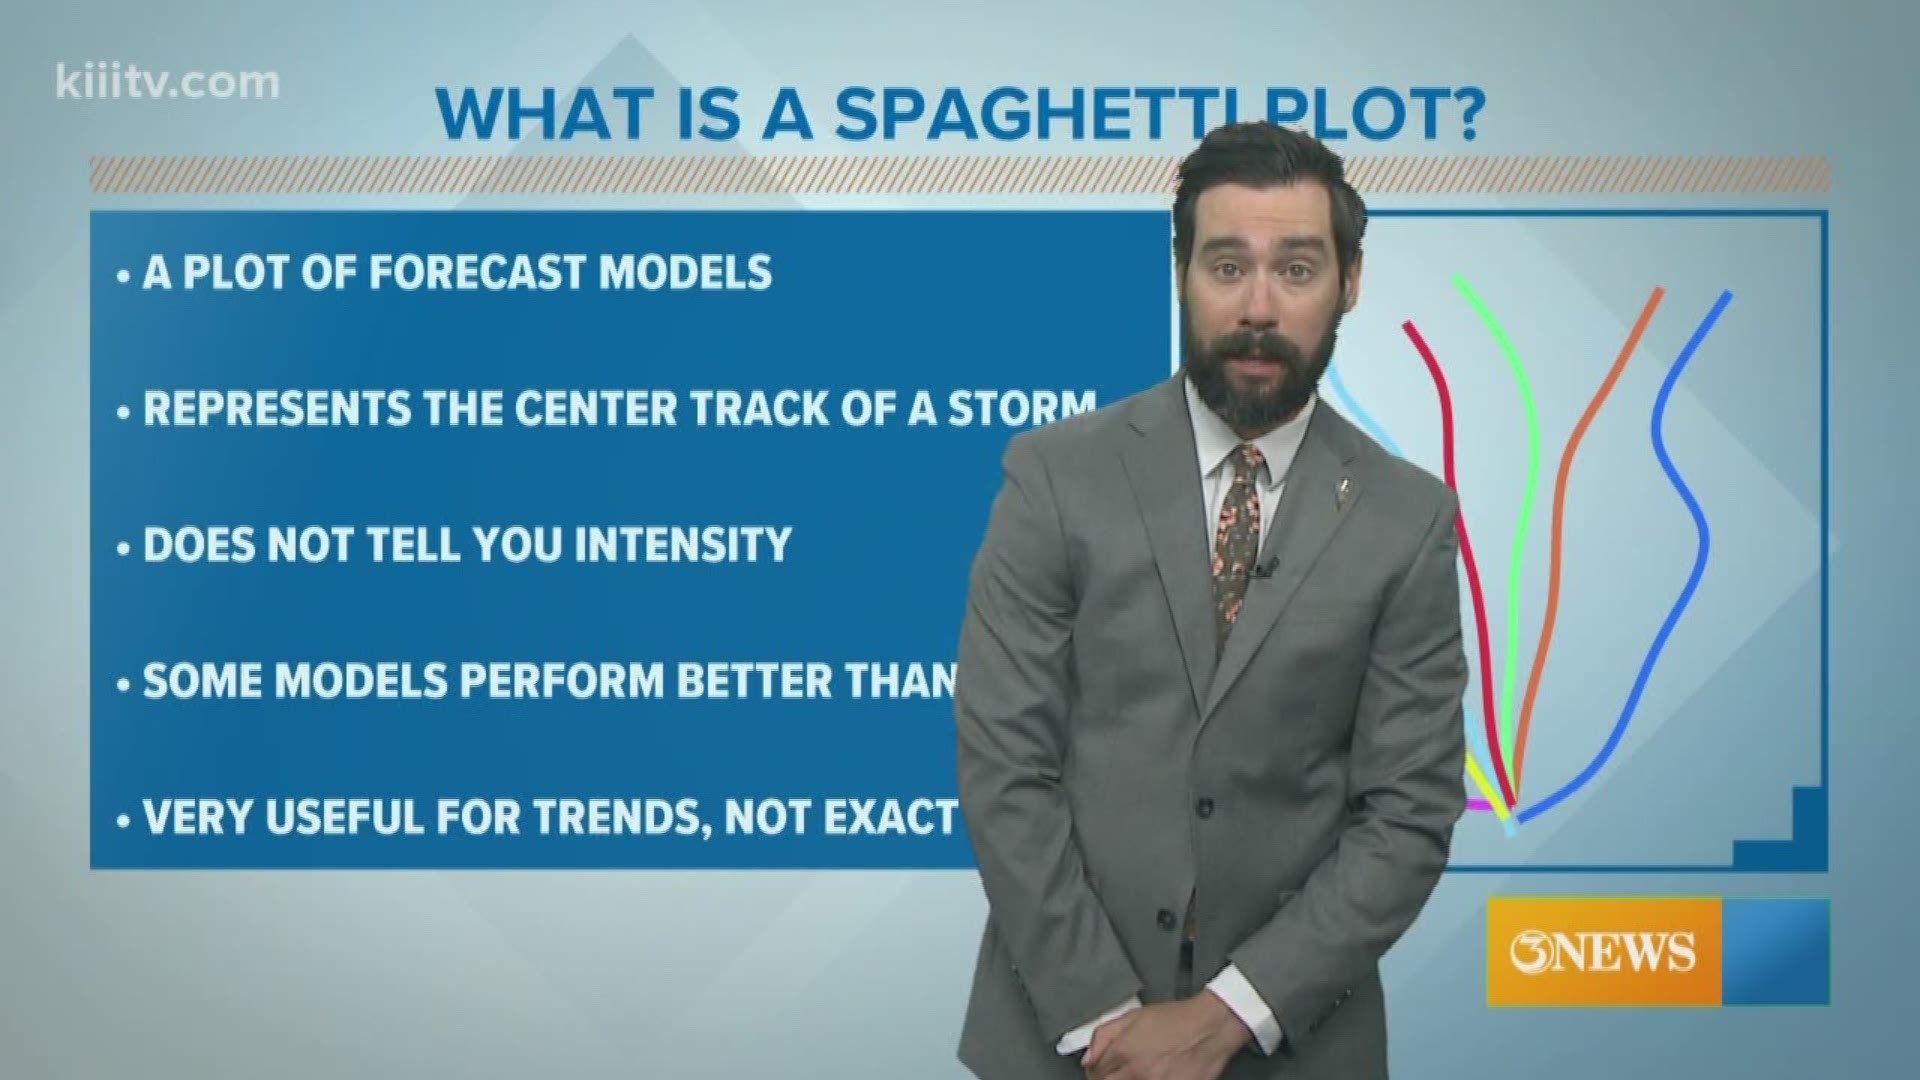 Spaghetti plots are a valuable tool in forecasting tropical systems.  They show you where different forecast models send the center of a tropical system.